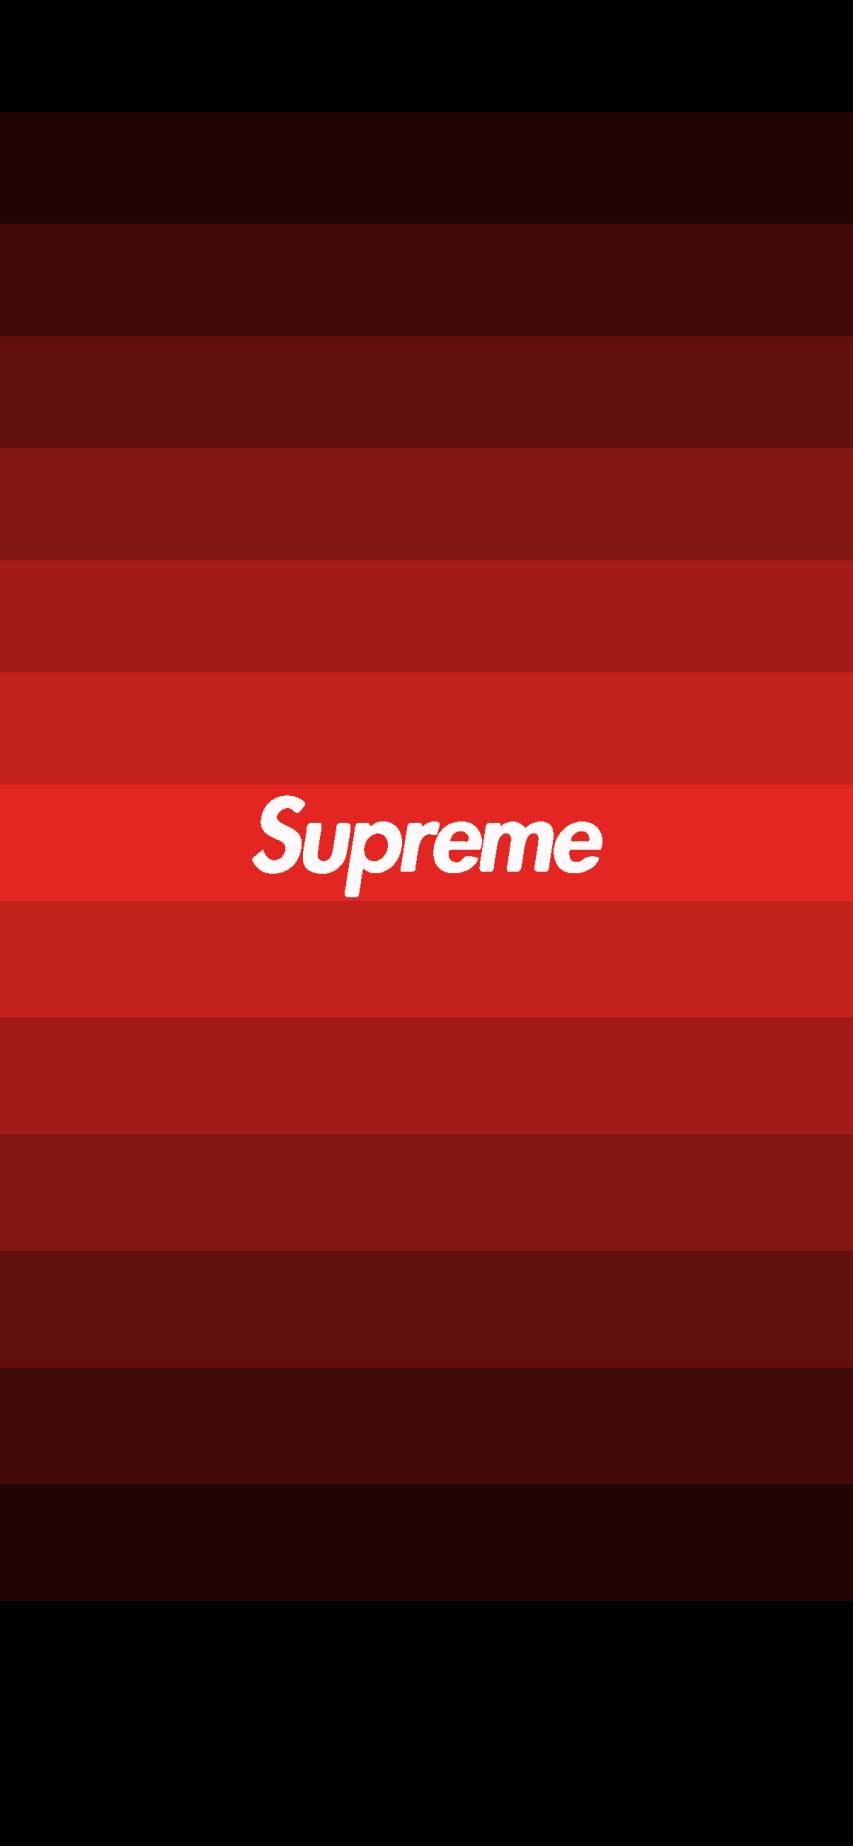 Supreme Red and Black Phone Backgrounds